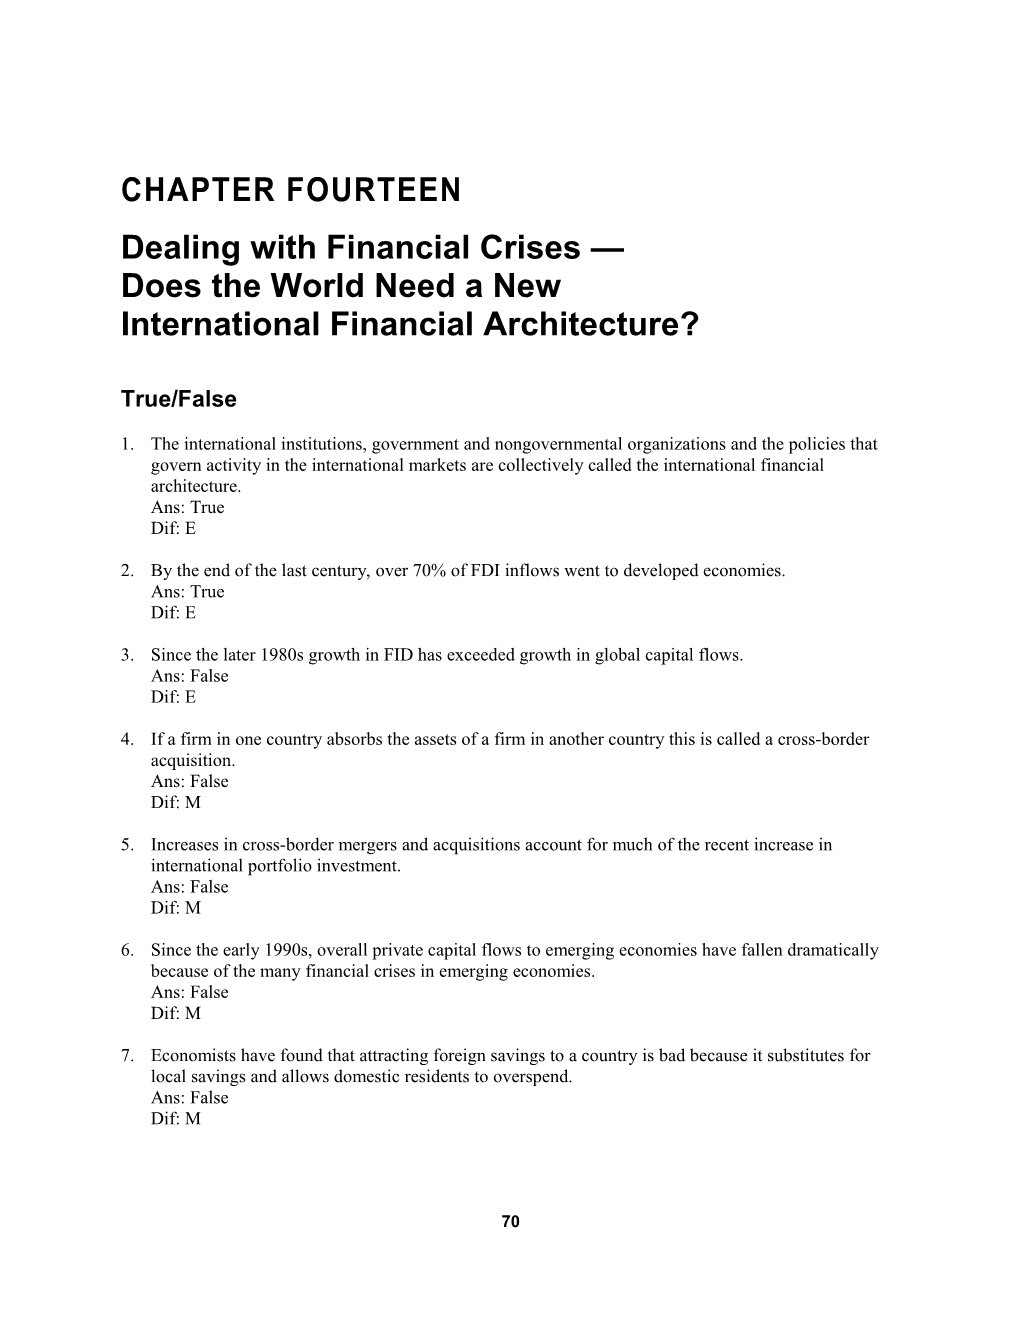 Dealing with Financial Crises Does the World Need a New Intl. Financial Architecture? 335